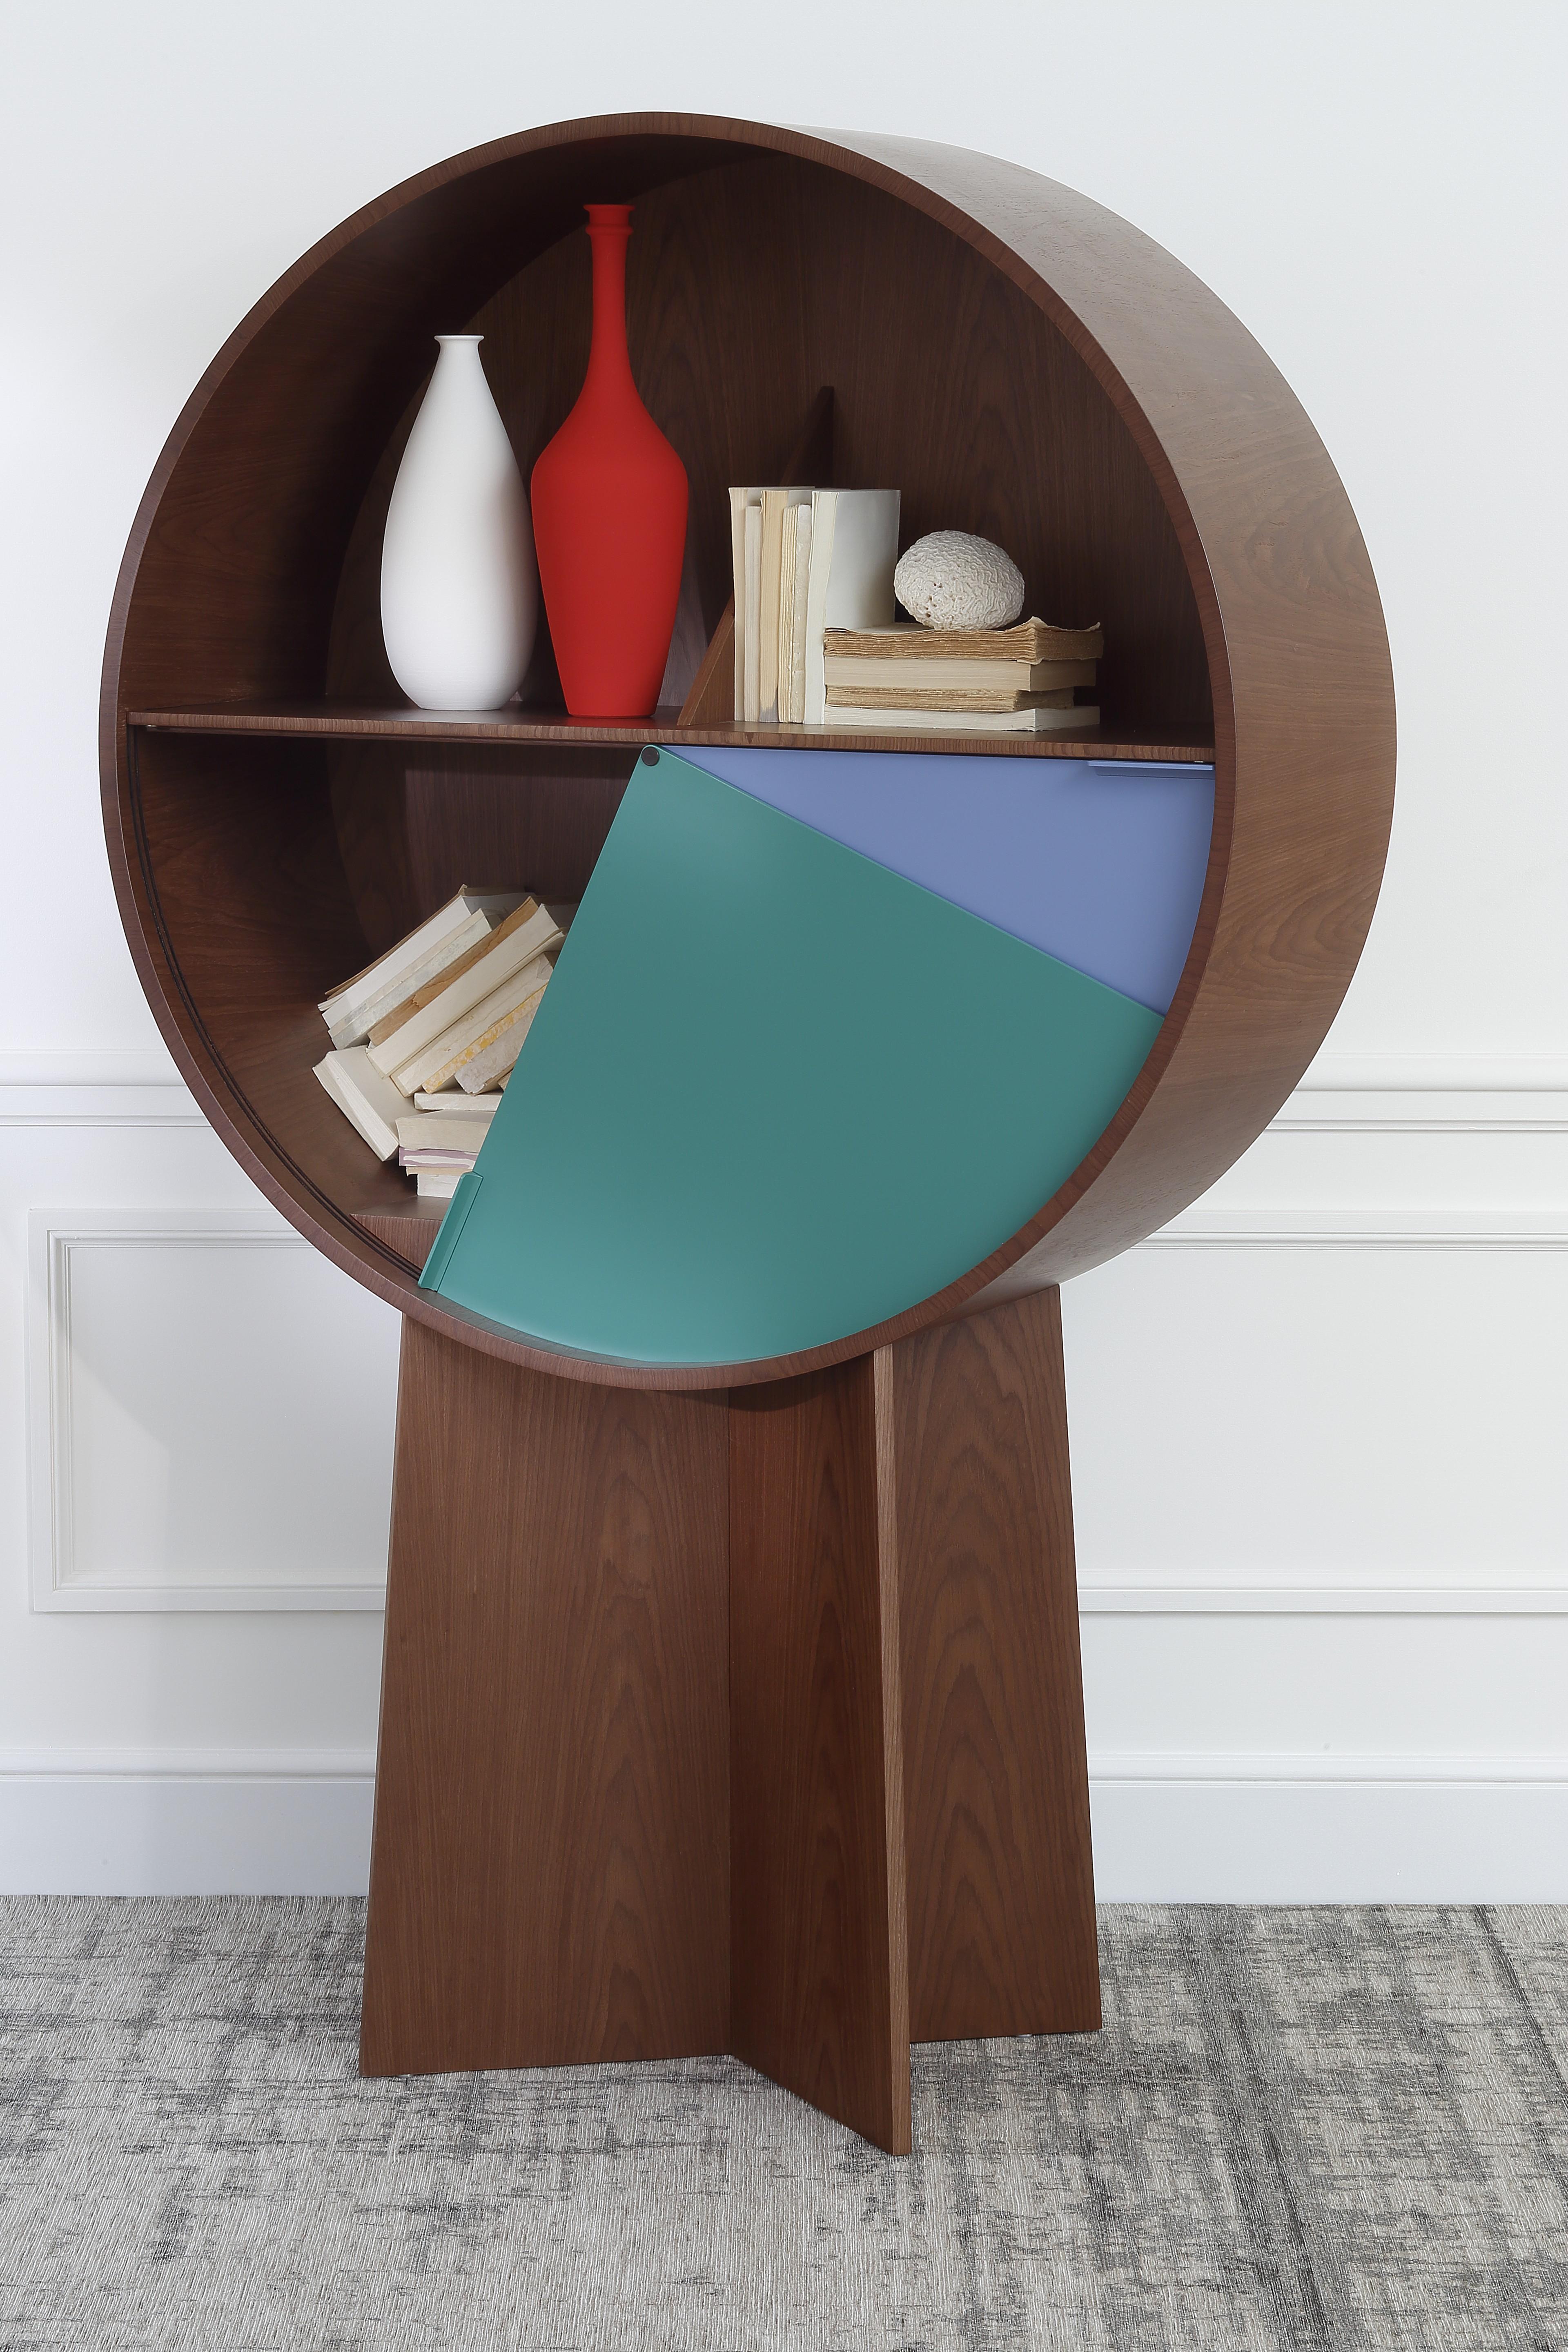 Luna walnut cabinet by Patricia Urquiola
Materials: Walnut veneer on MDF
Dimensions: 110 x 40 x 175 cm

The Luna is a strong and creative piece, in walnut veneer or in orange
lacquered medium, with 2 sliding doors. It is a colorful storage